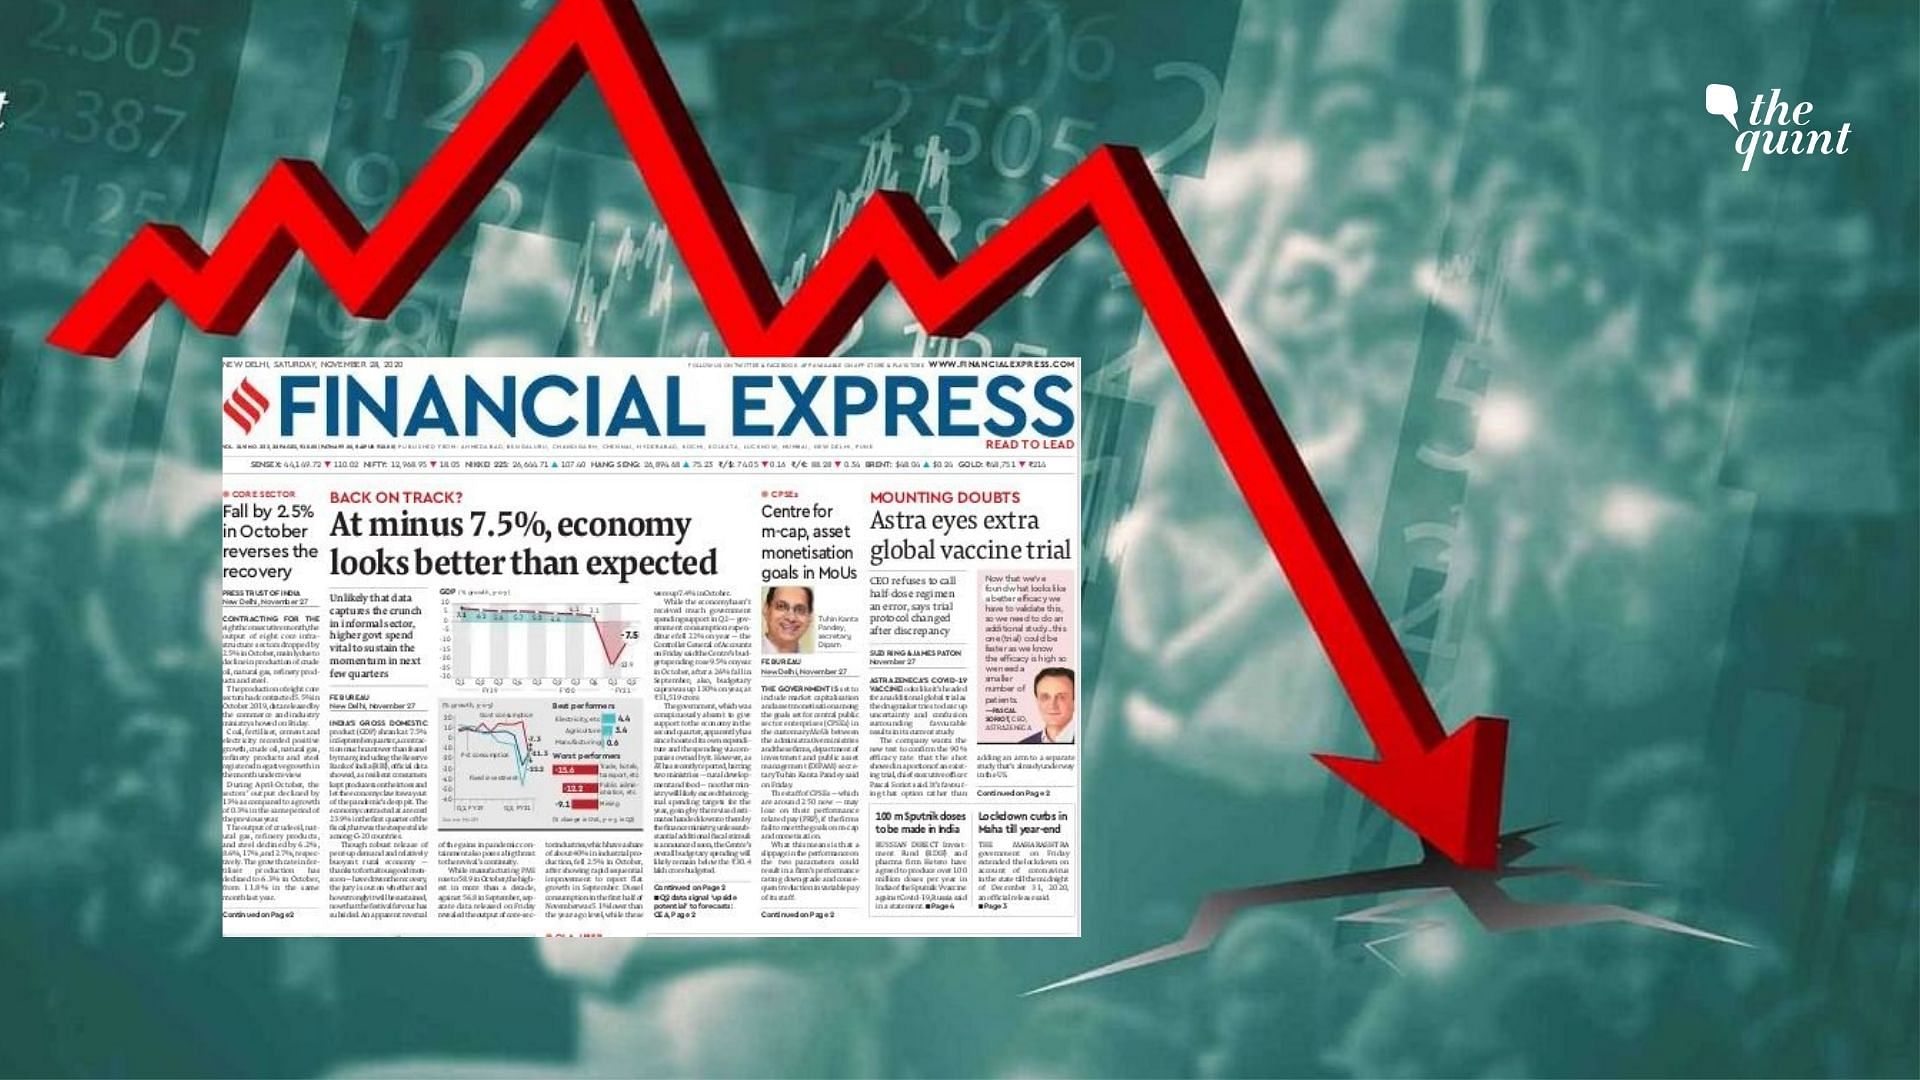 As experts and analysts discuss what the GDP figures mean for the economy, here’s how newspapers covered it.